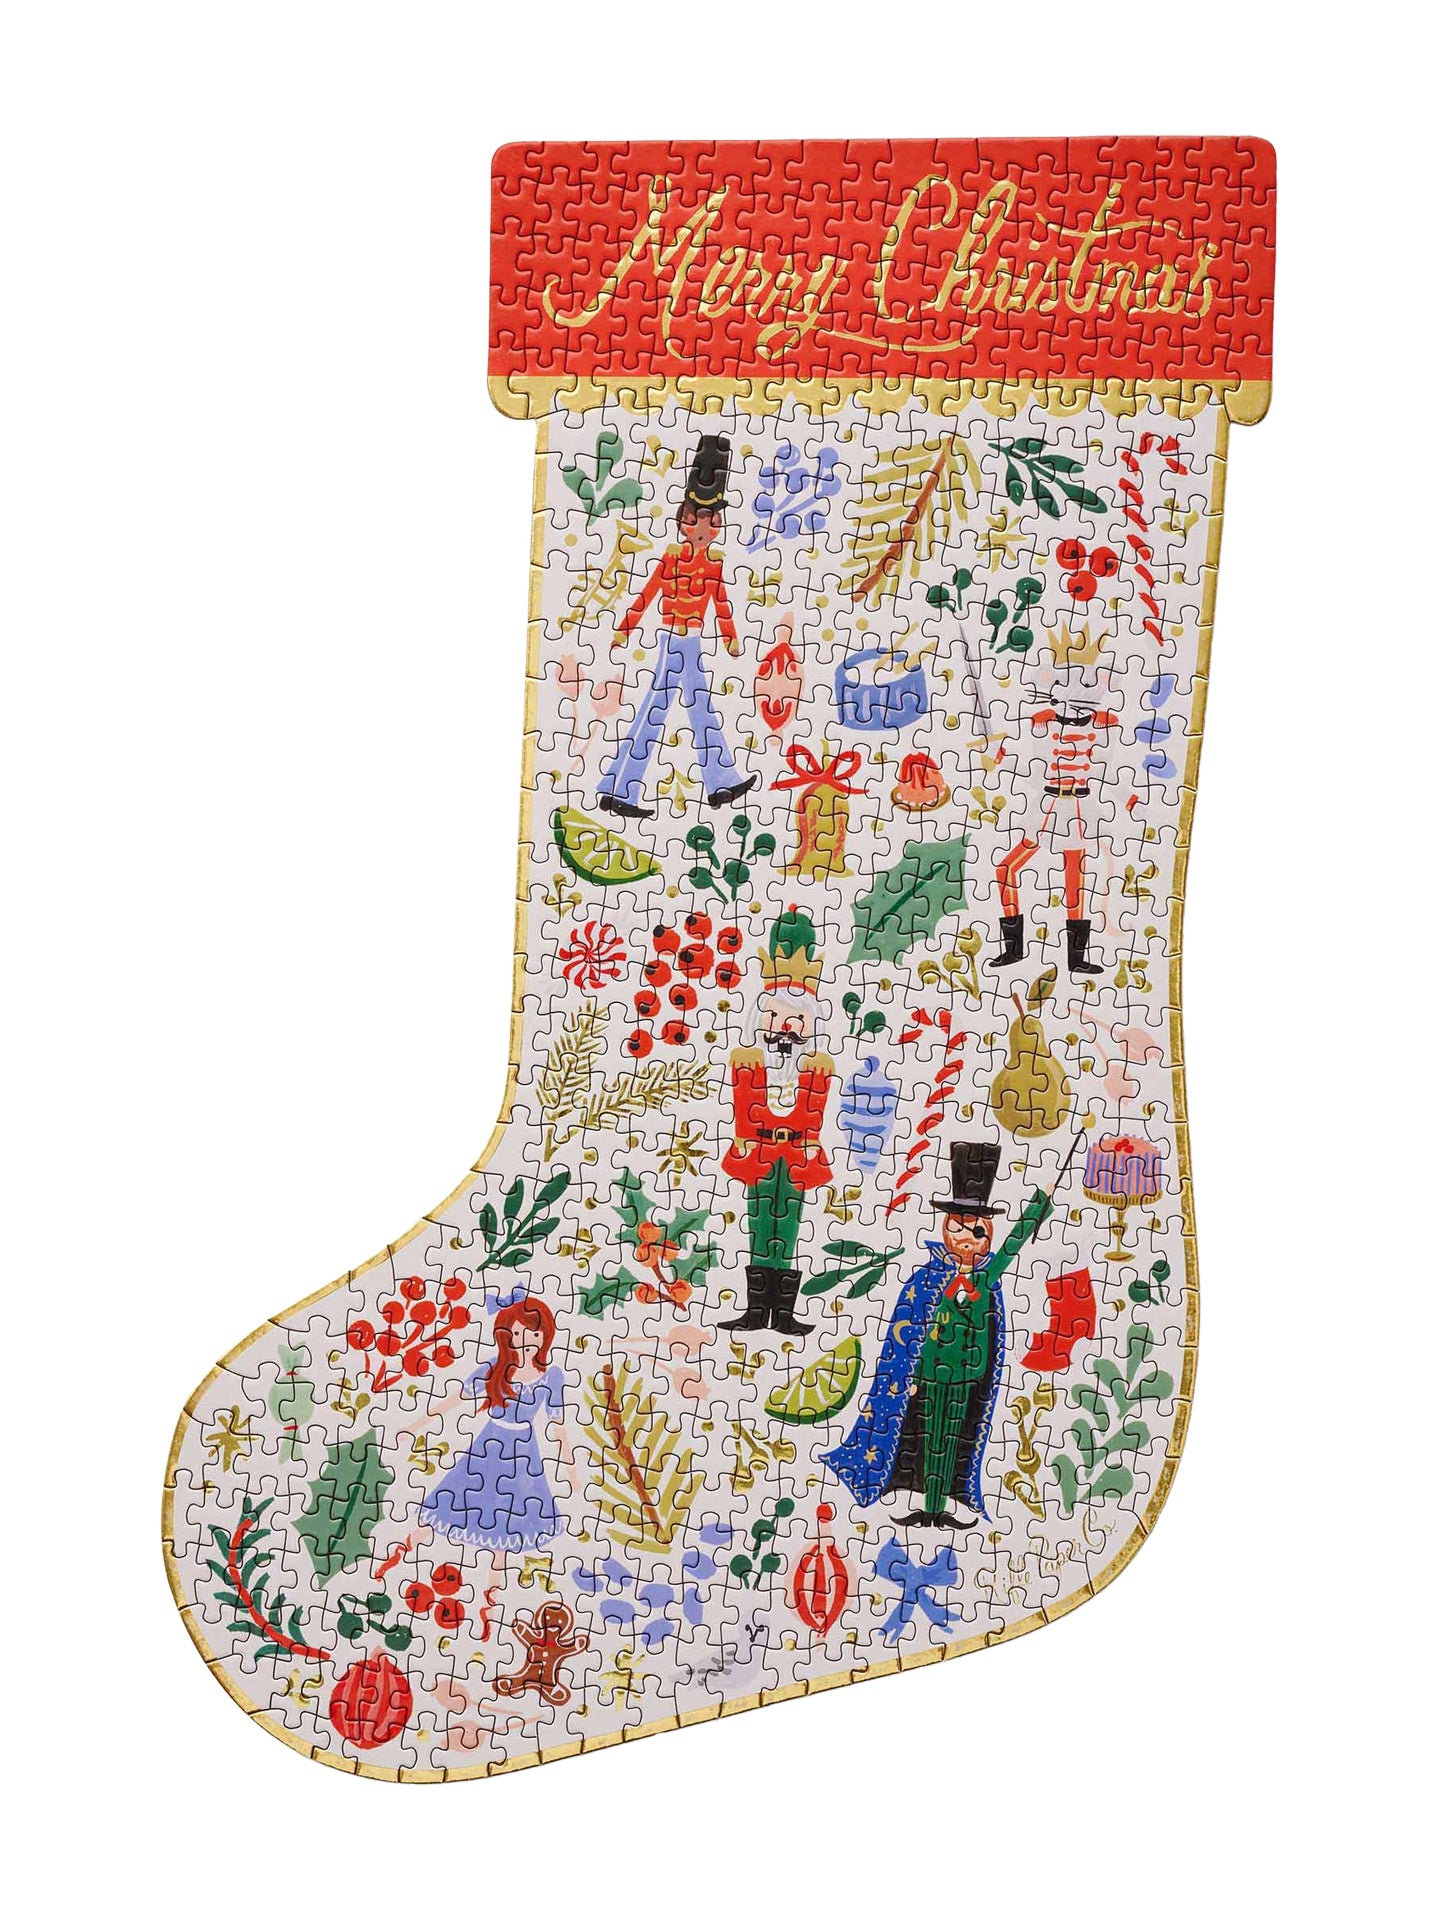 Nutcracker Sweets Stocking Puzzle, 500 pieces